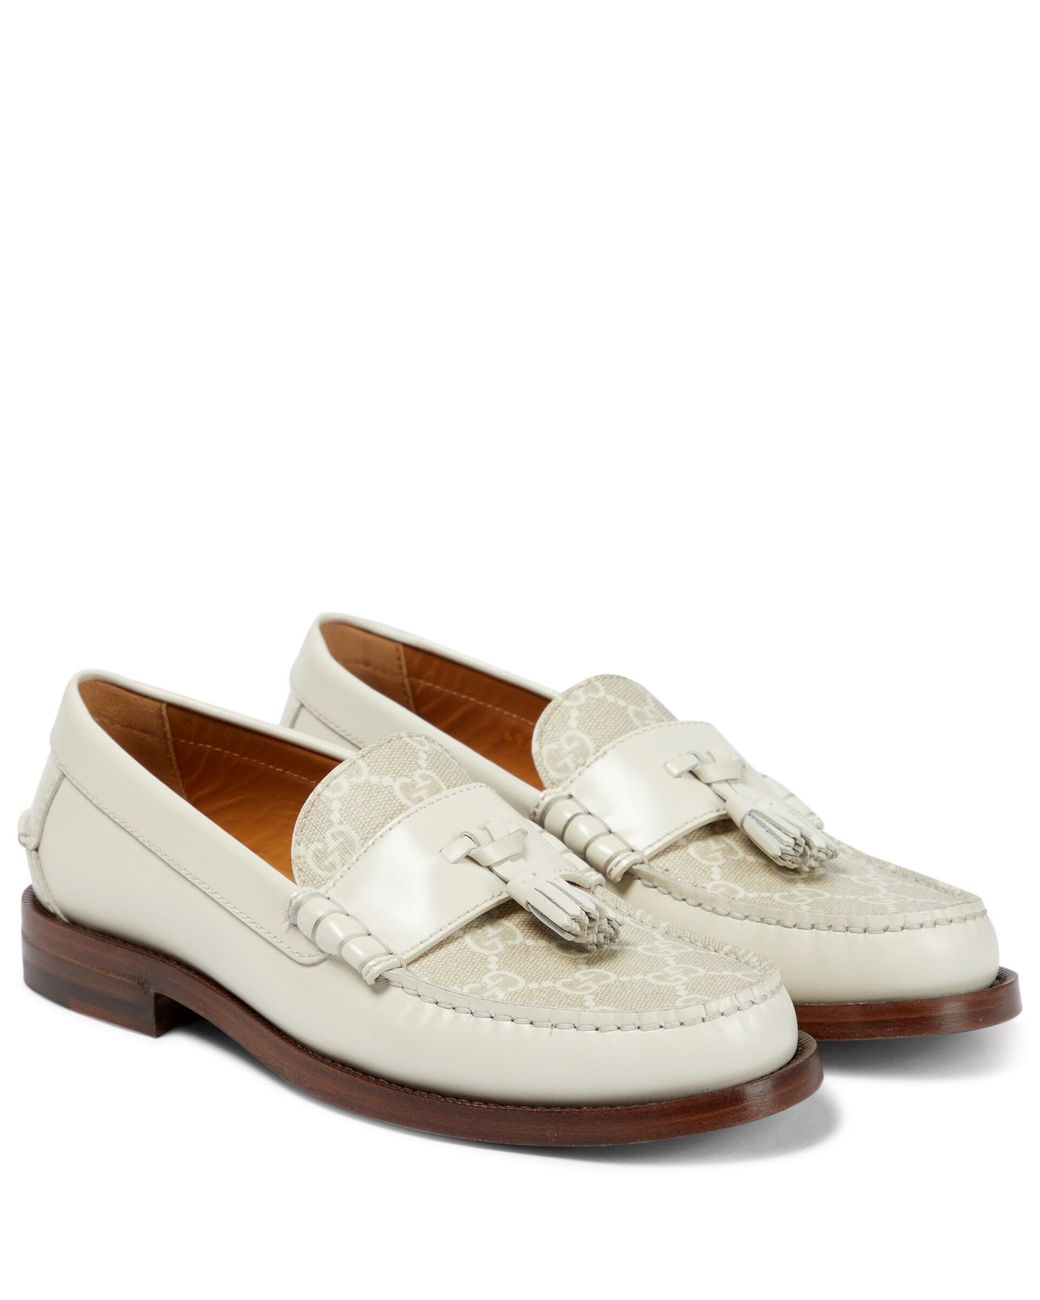 Gucci Tasseled Leather And Canvas Loafers in White | Lyst